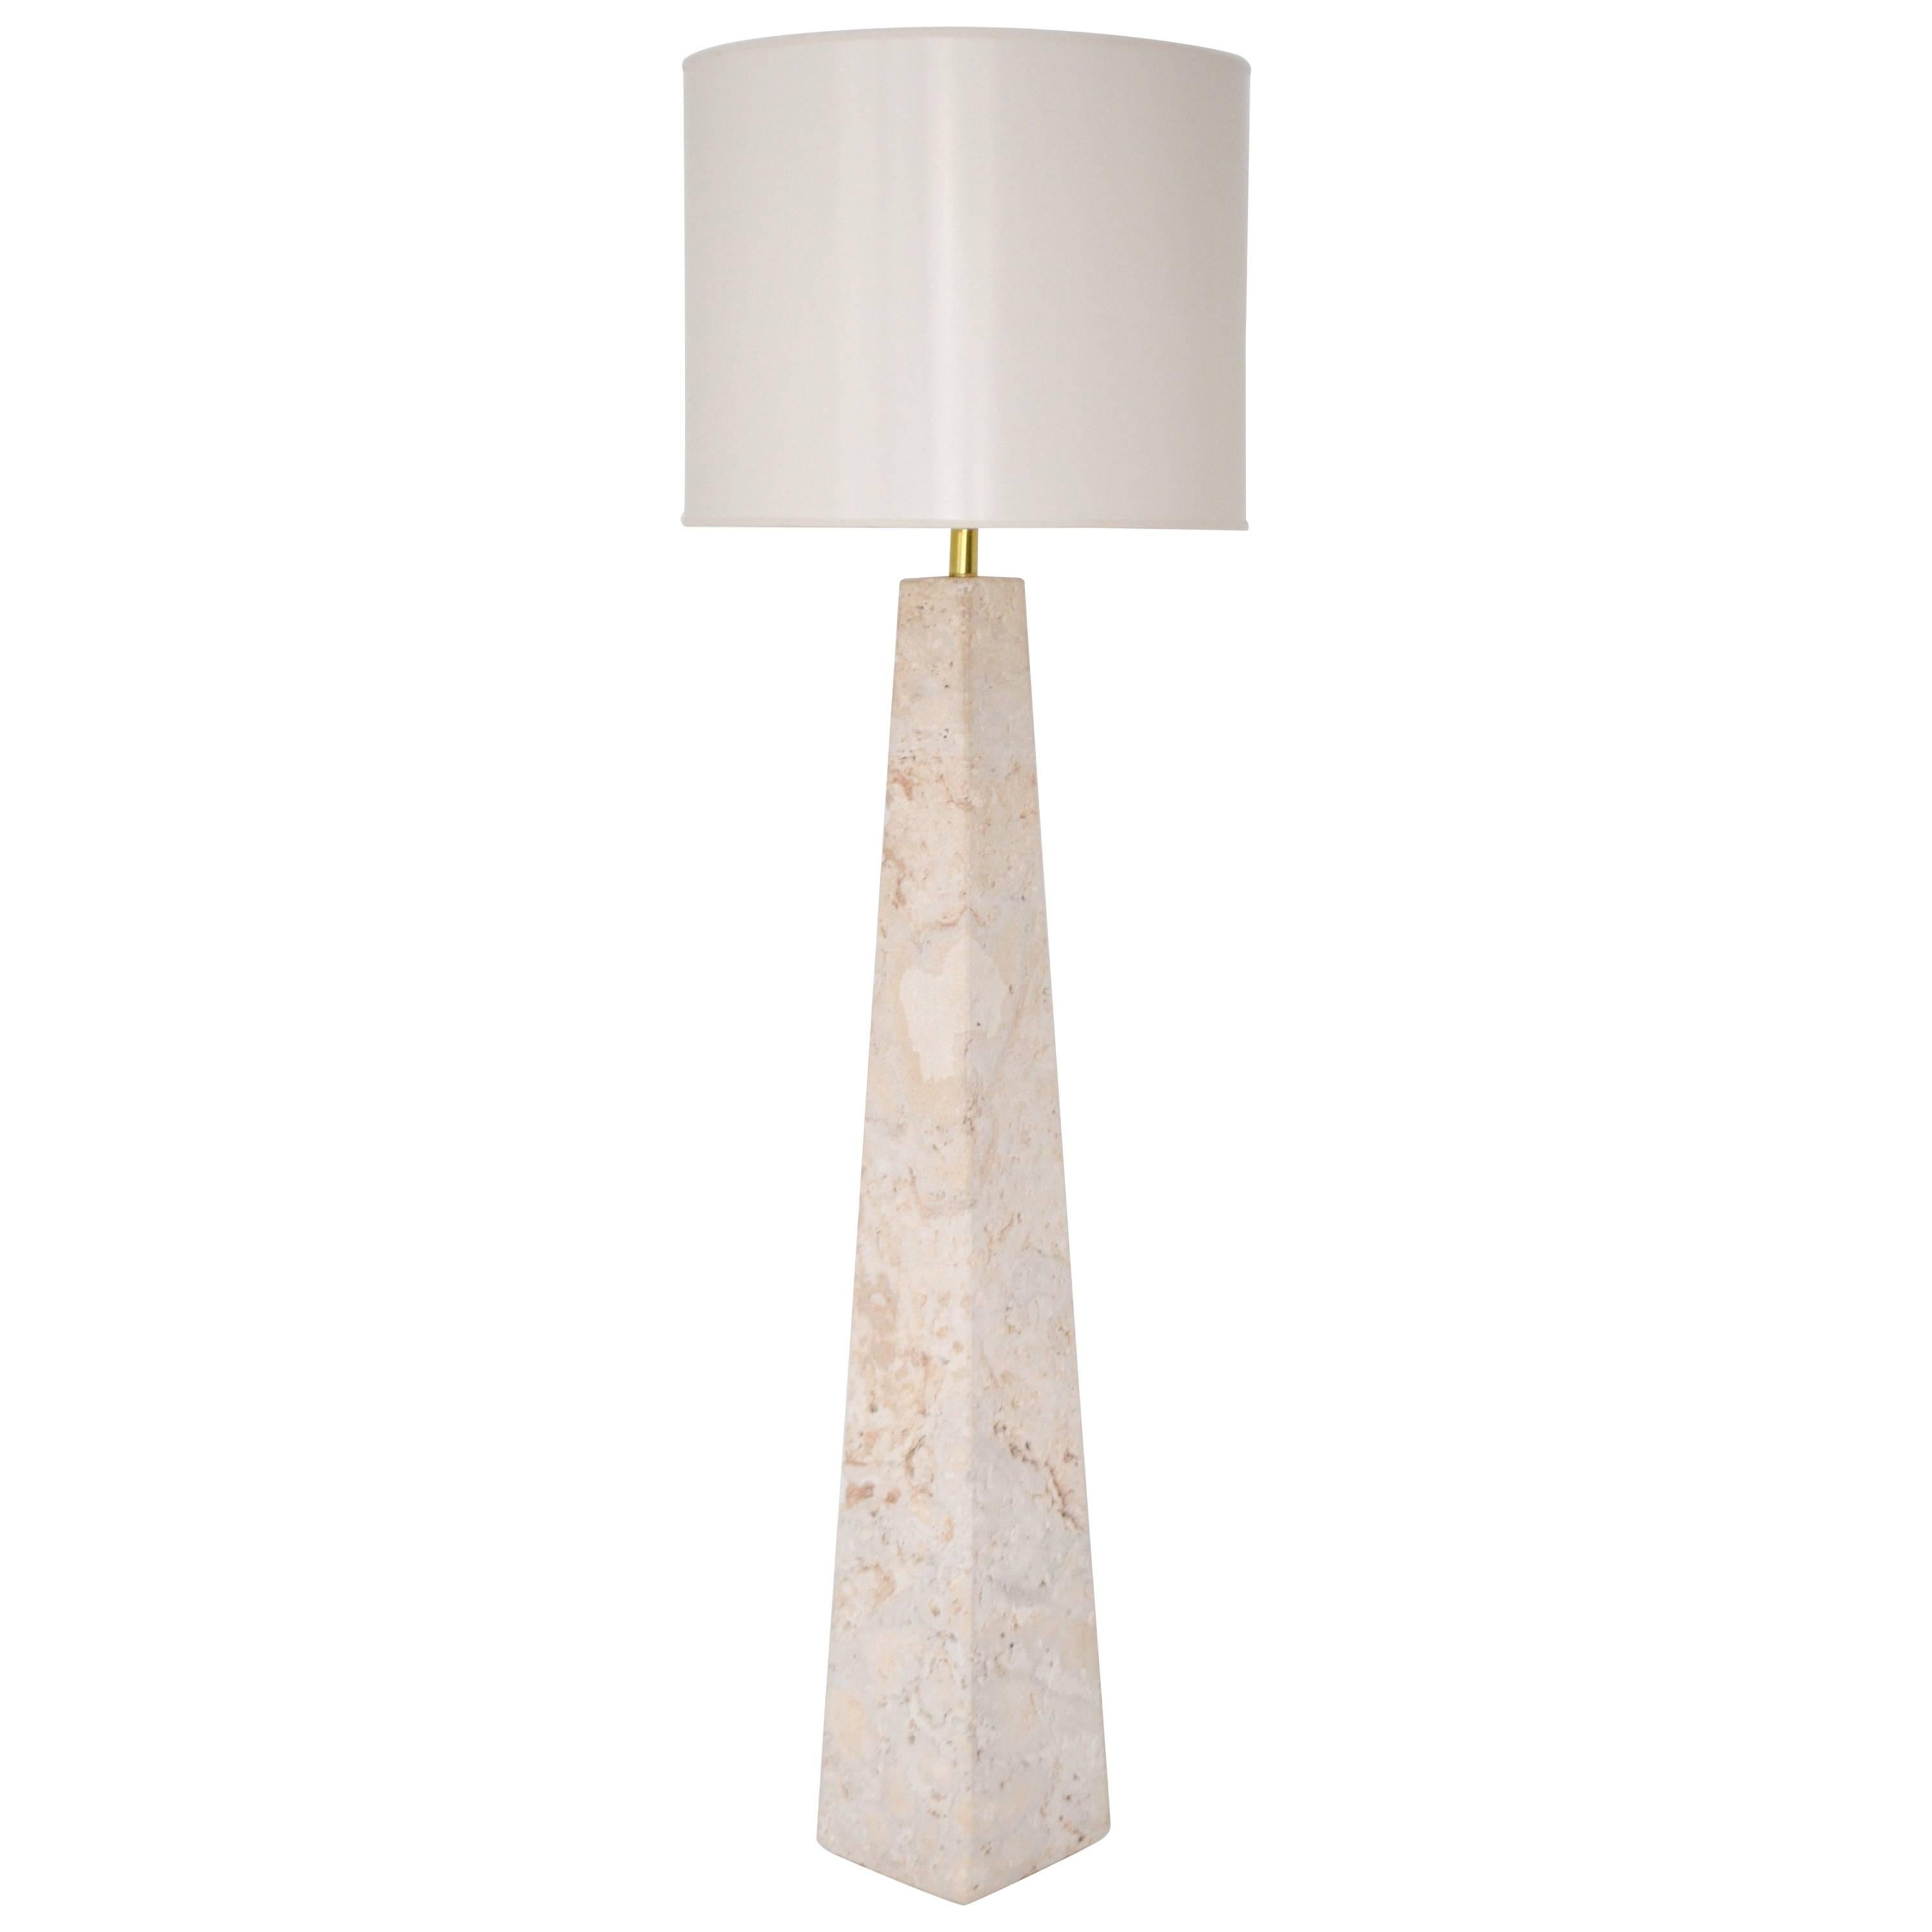 Midcentury Coral Stone Pyramid Form Floor Lamp For Sale